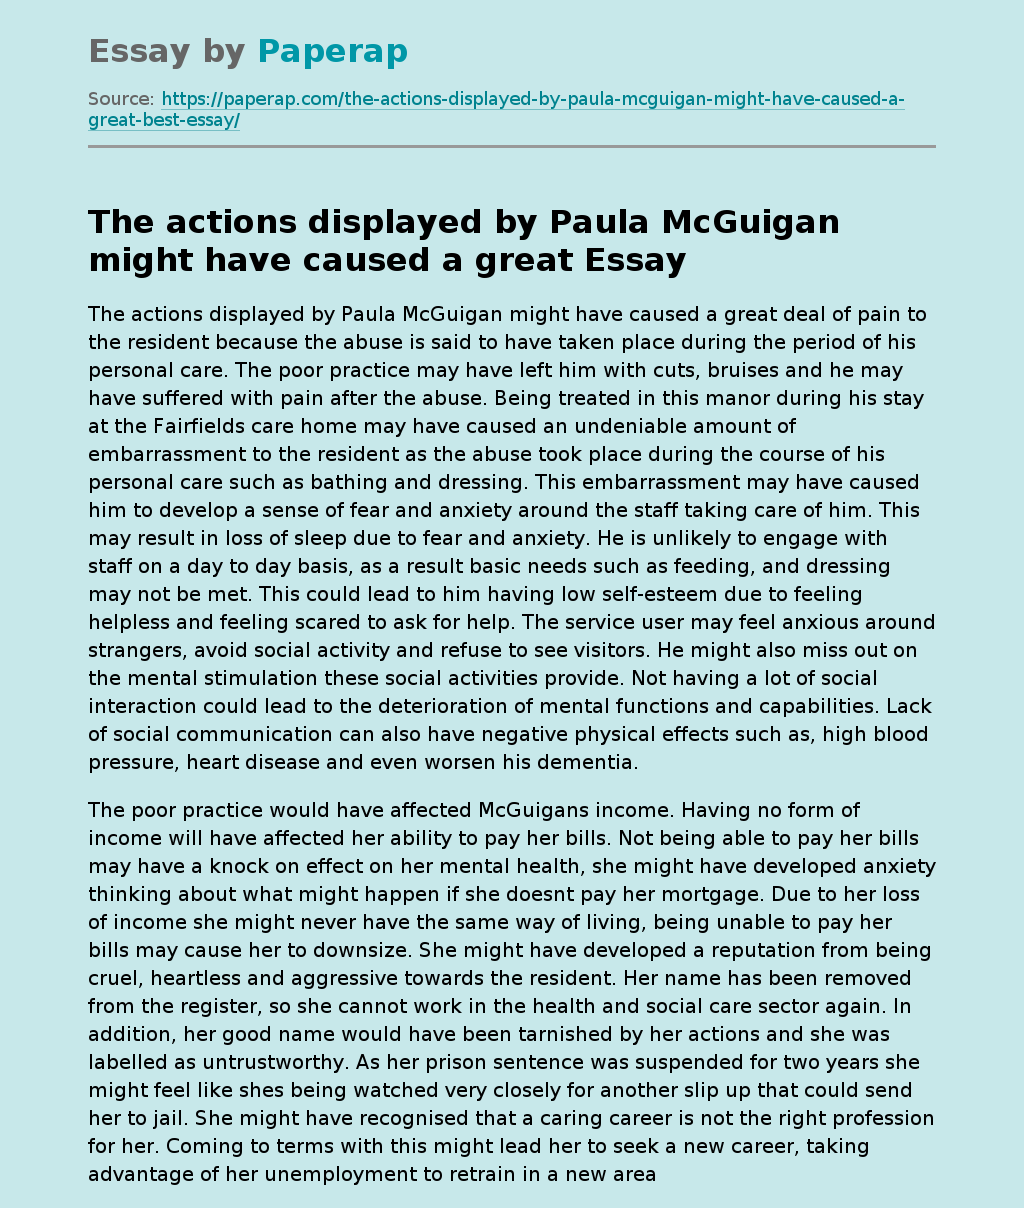 The Actions Displayed by Paula McGuigan Might Have Caused a Great